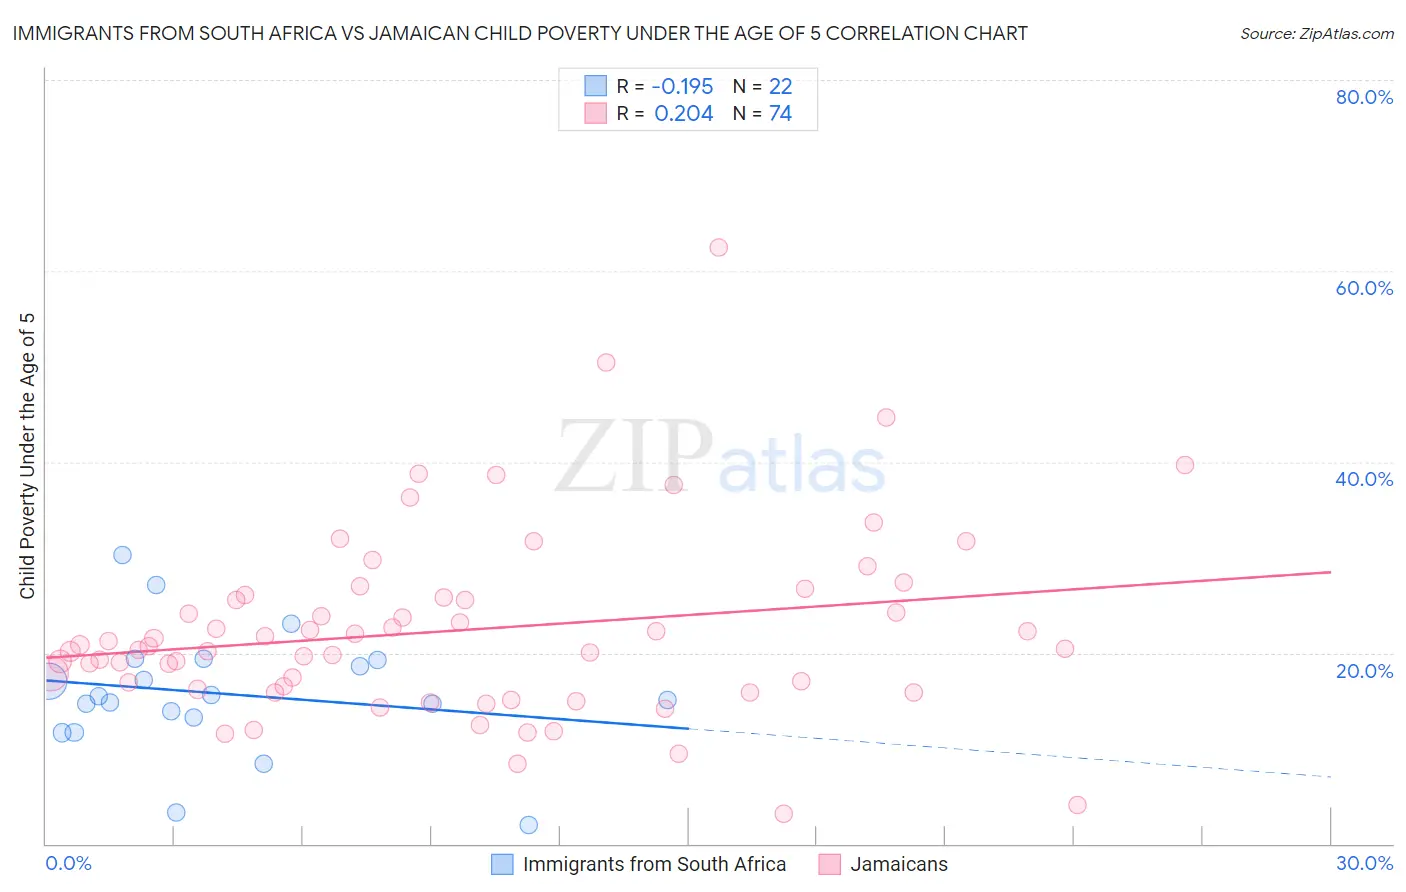 Immigrants from South Africa vs Jamaican Child Poverty Under the Age of 5